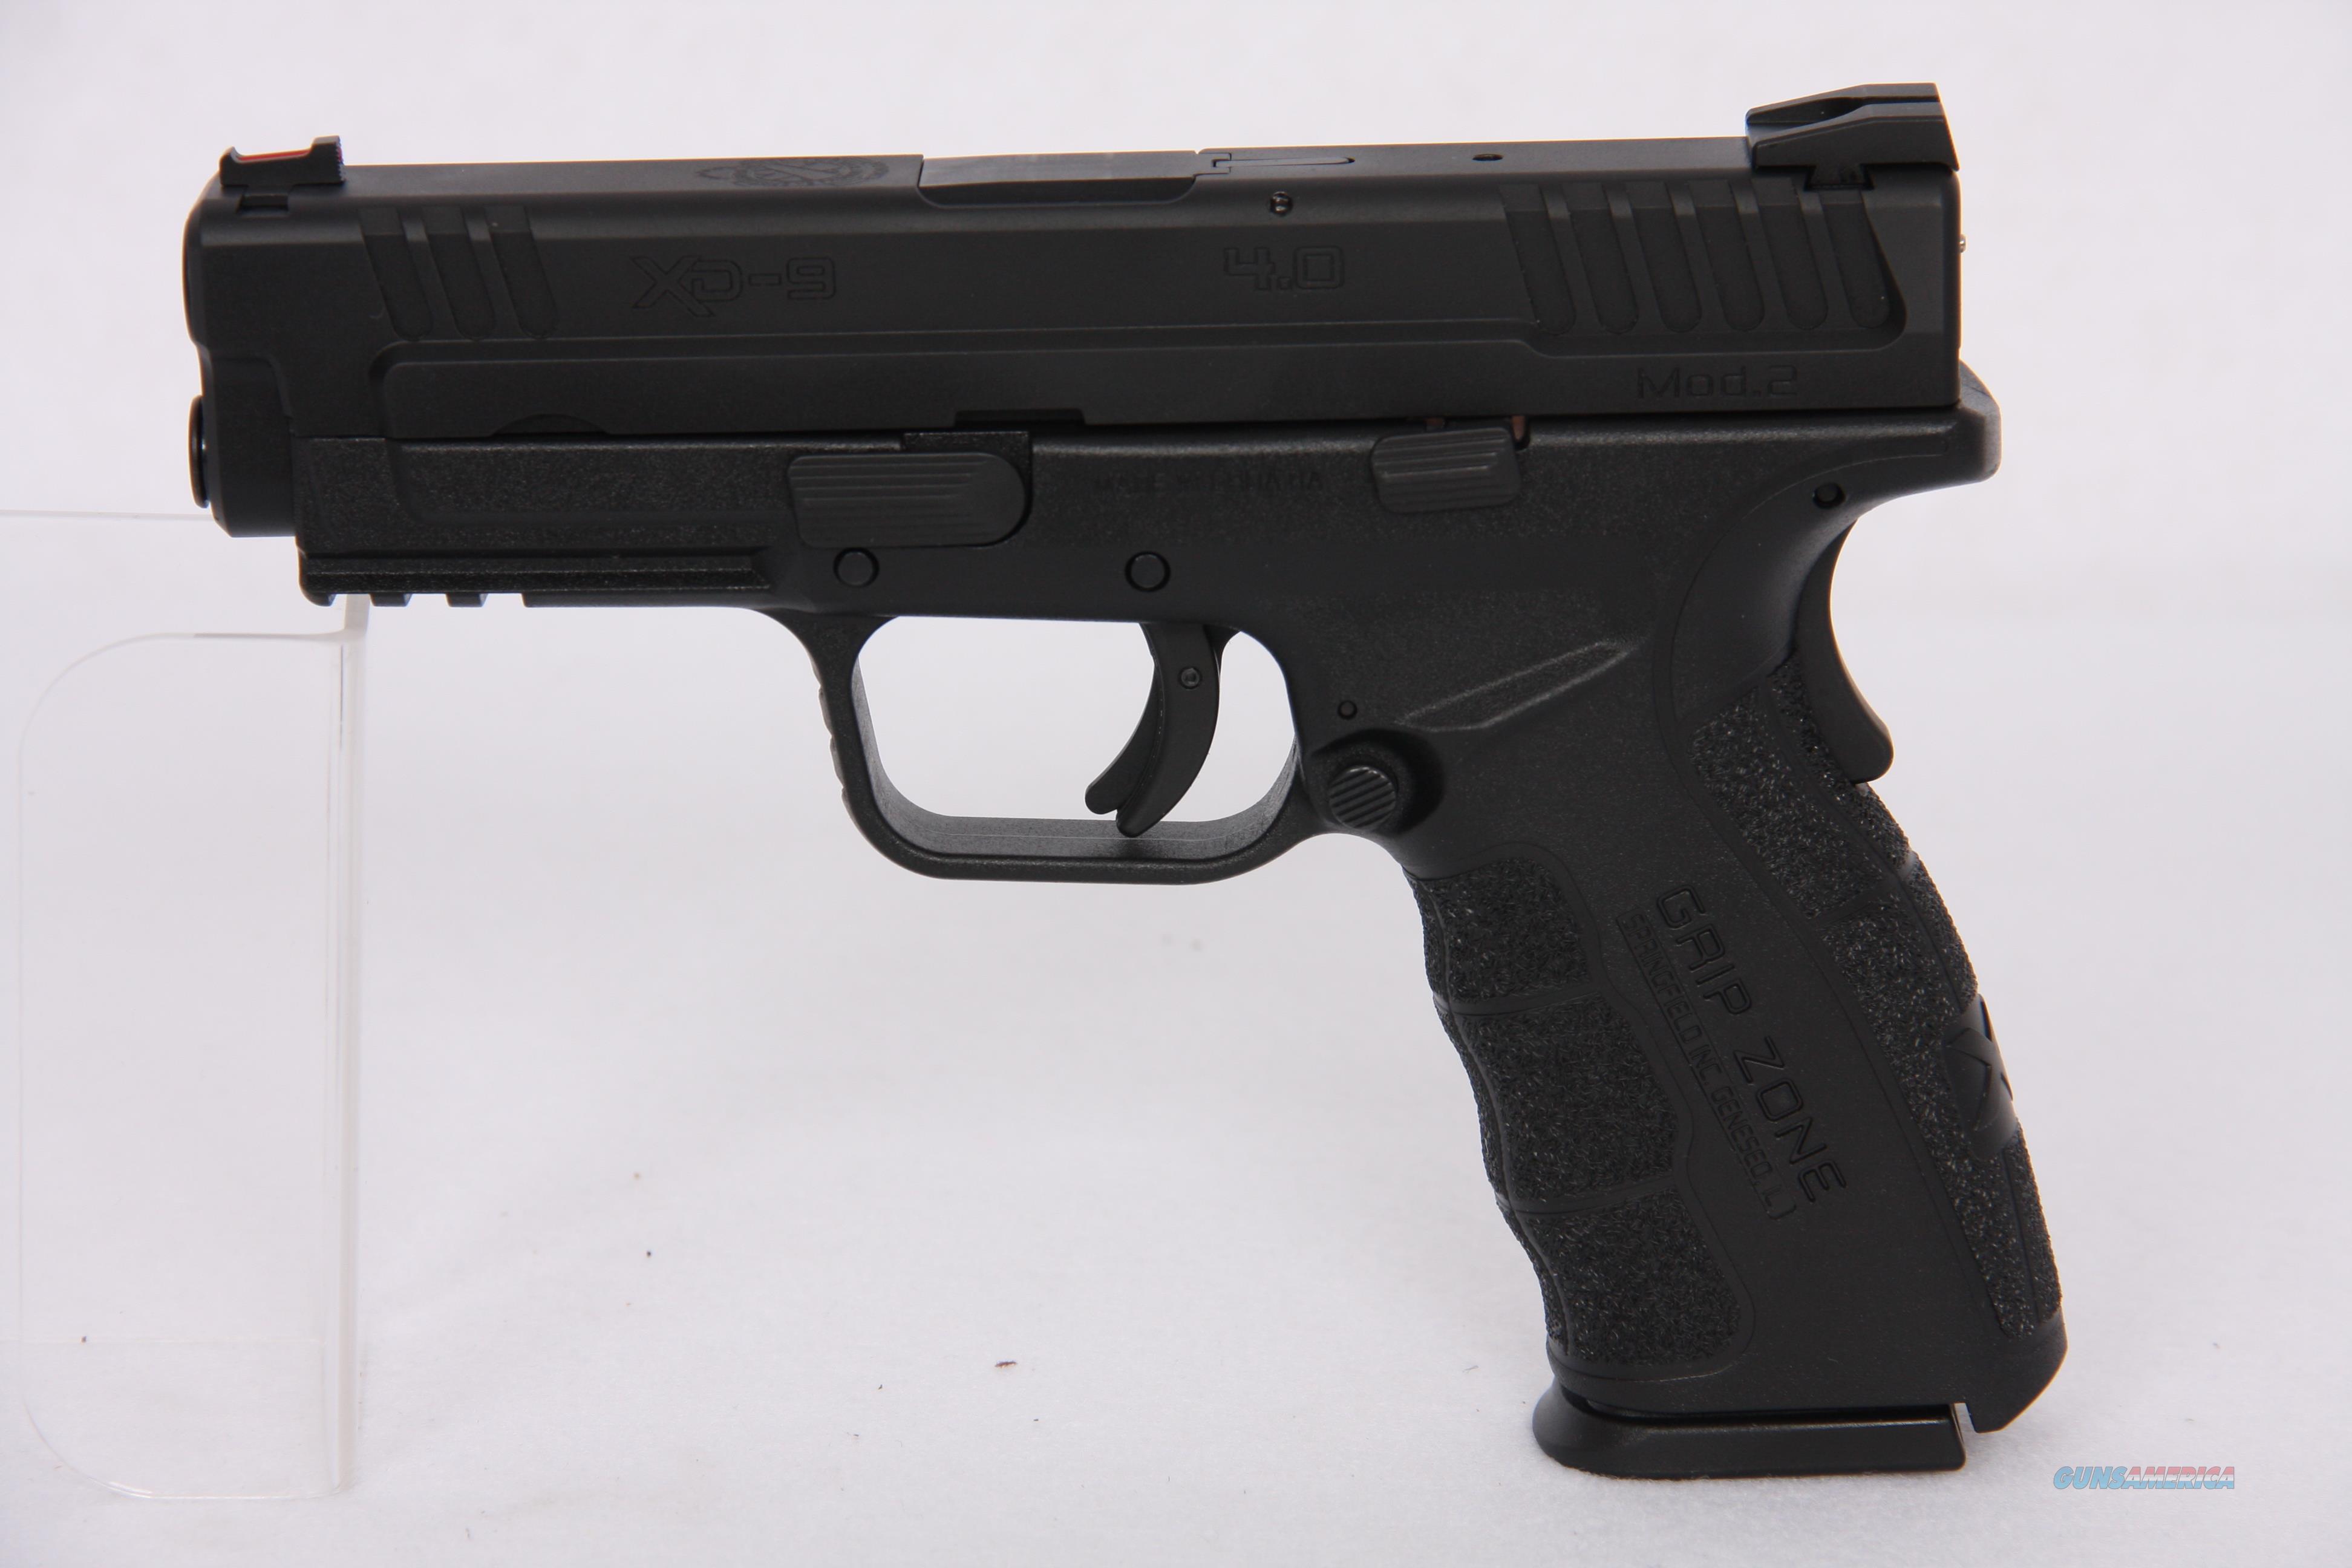 springfield xd 9mm for sale